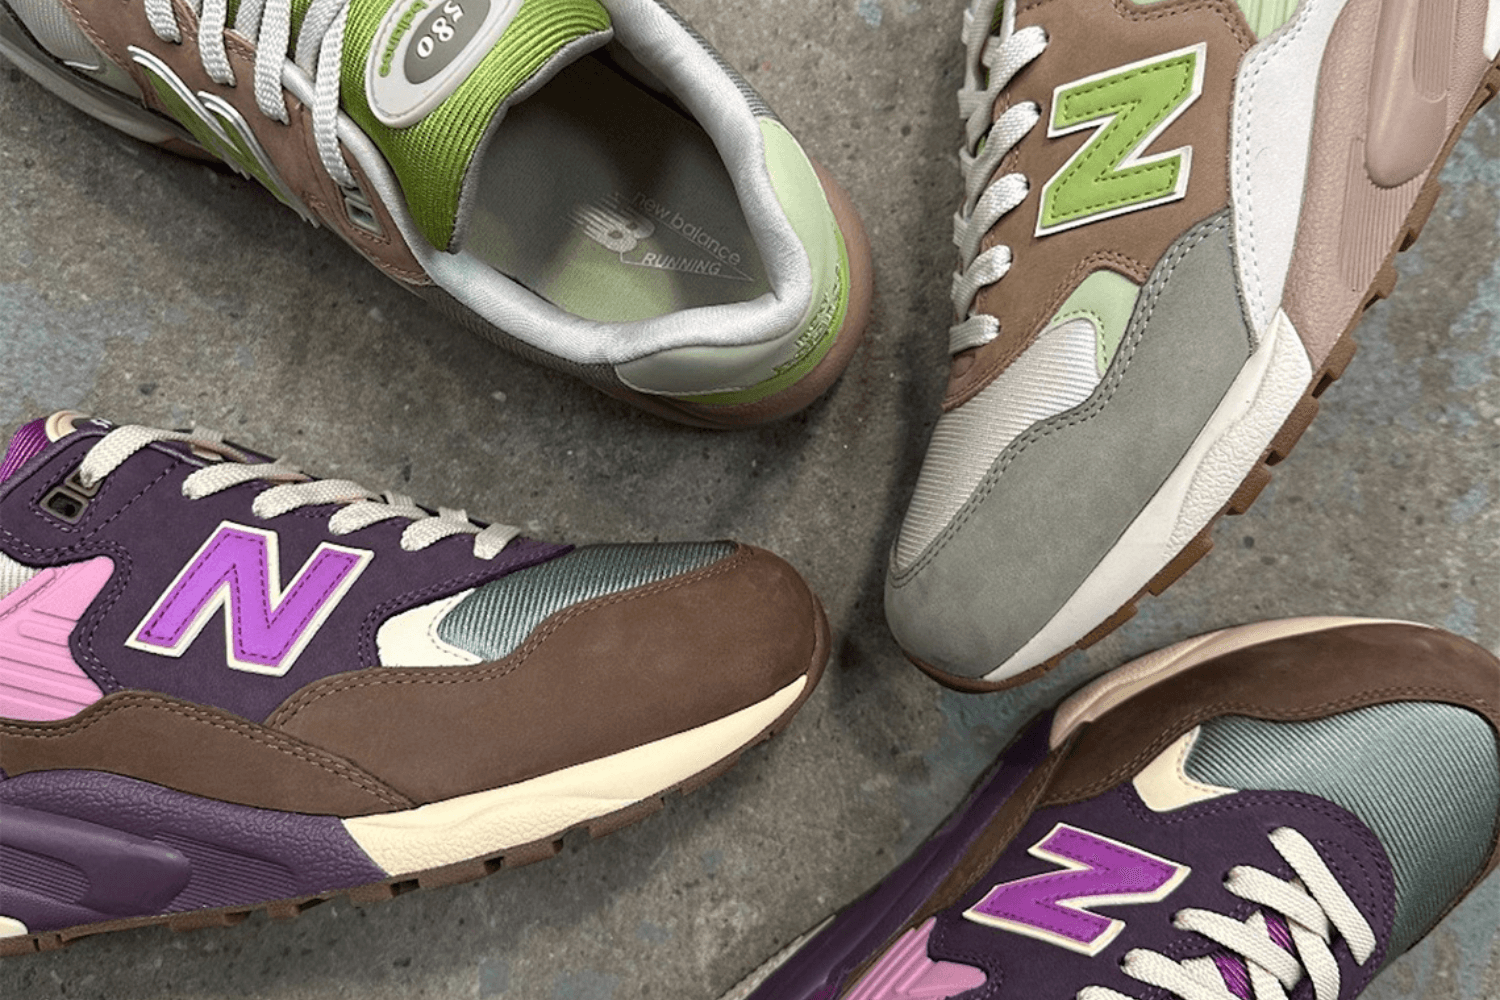 New Balance 580 gets Size? exclusive release